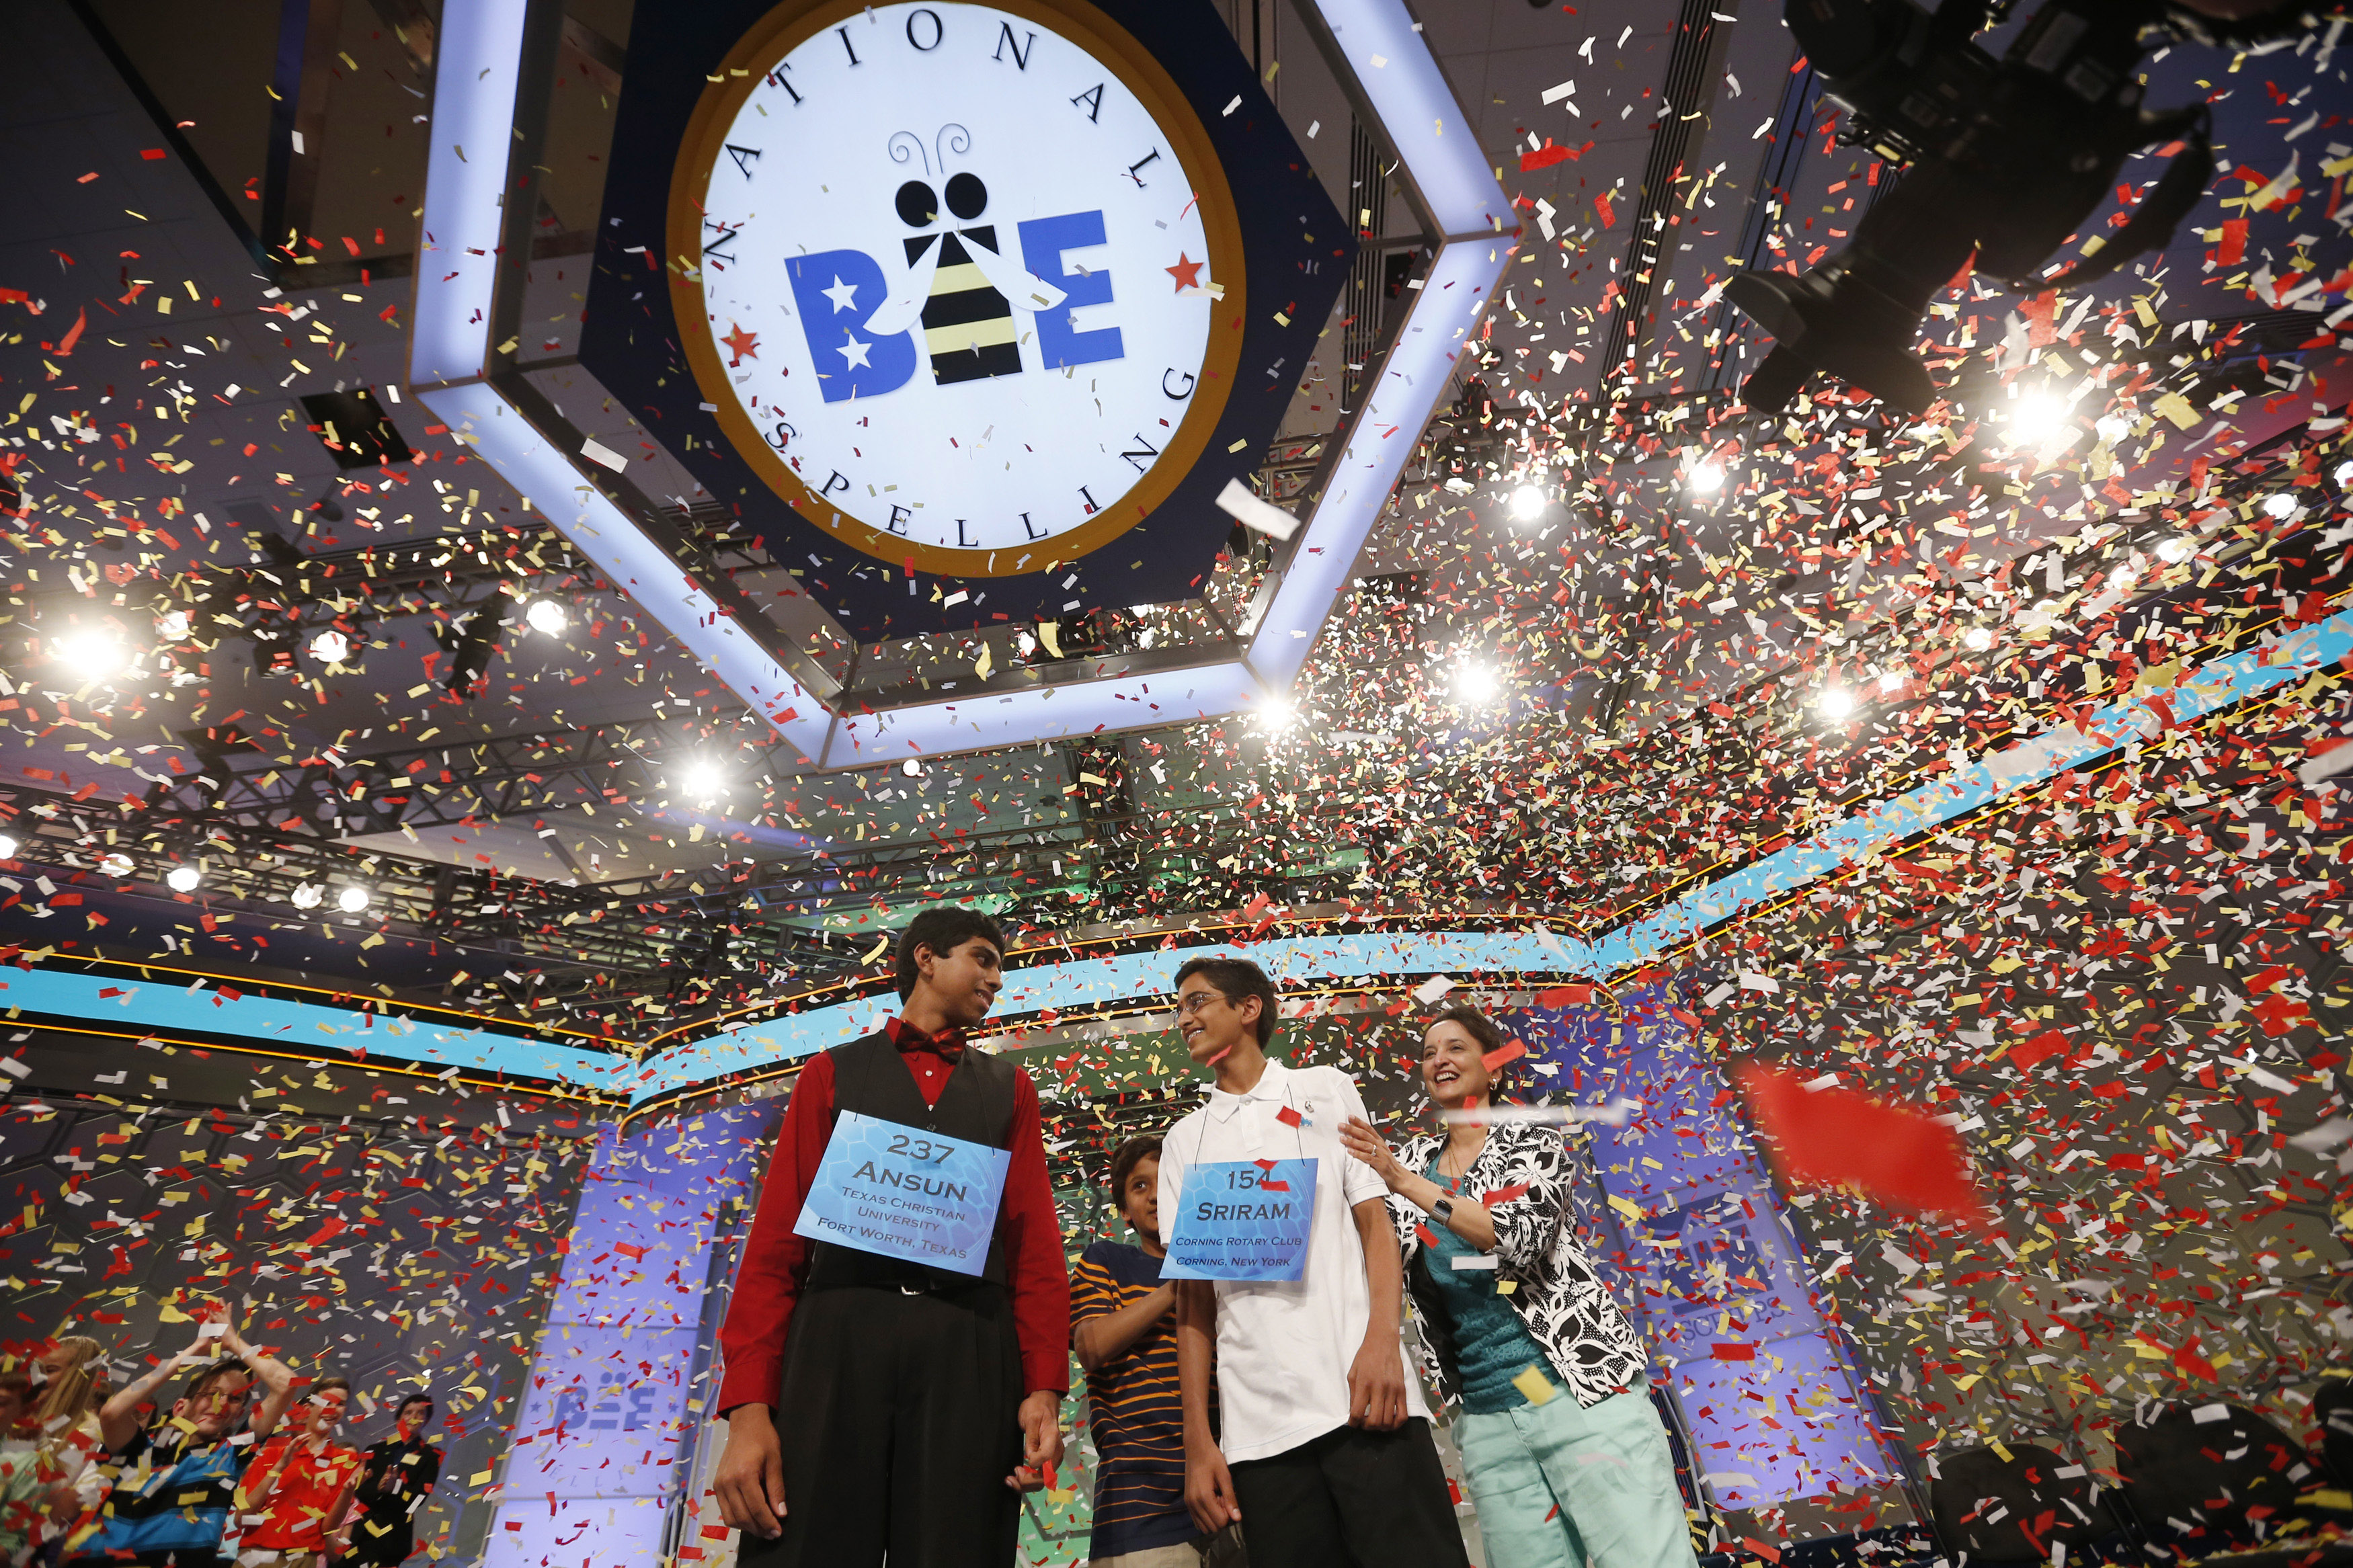 Sriram Hathwar of Painted Post, N.Y., stands next to his mother Roopa, far right, as he and Ansun Sujoe of Fort Worth are named joint winners of the Scripps National Spelling Bee in National Harbor, Md., on May 29, 2014. (Kevin Lamarque—Reuters)